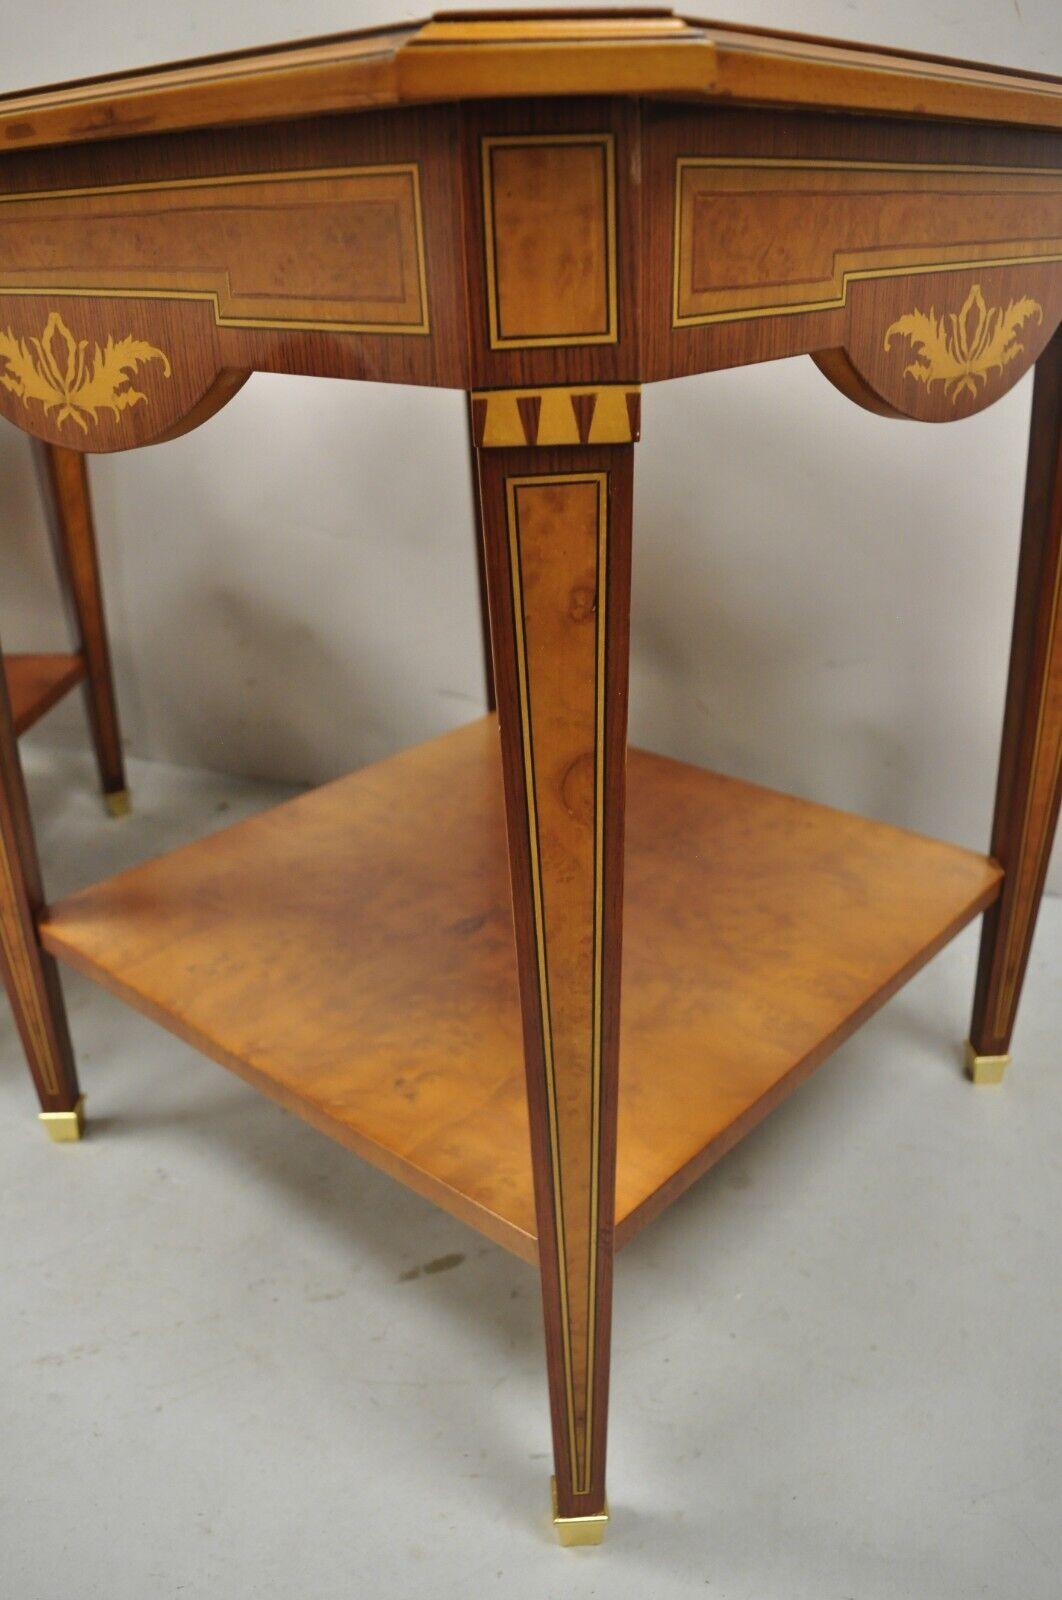 Mahogany French Louis XVI Style Satinwood Inlay Side End Tables by Mudeva - a Pair       